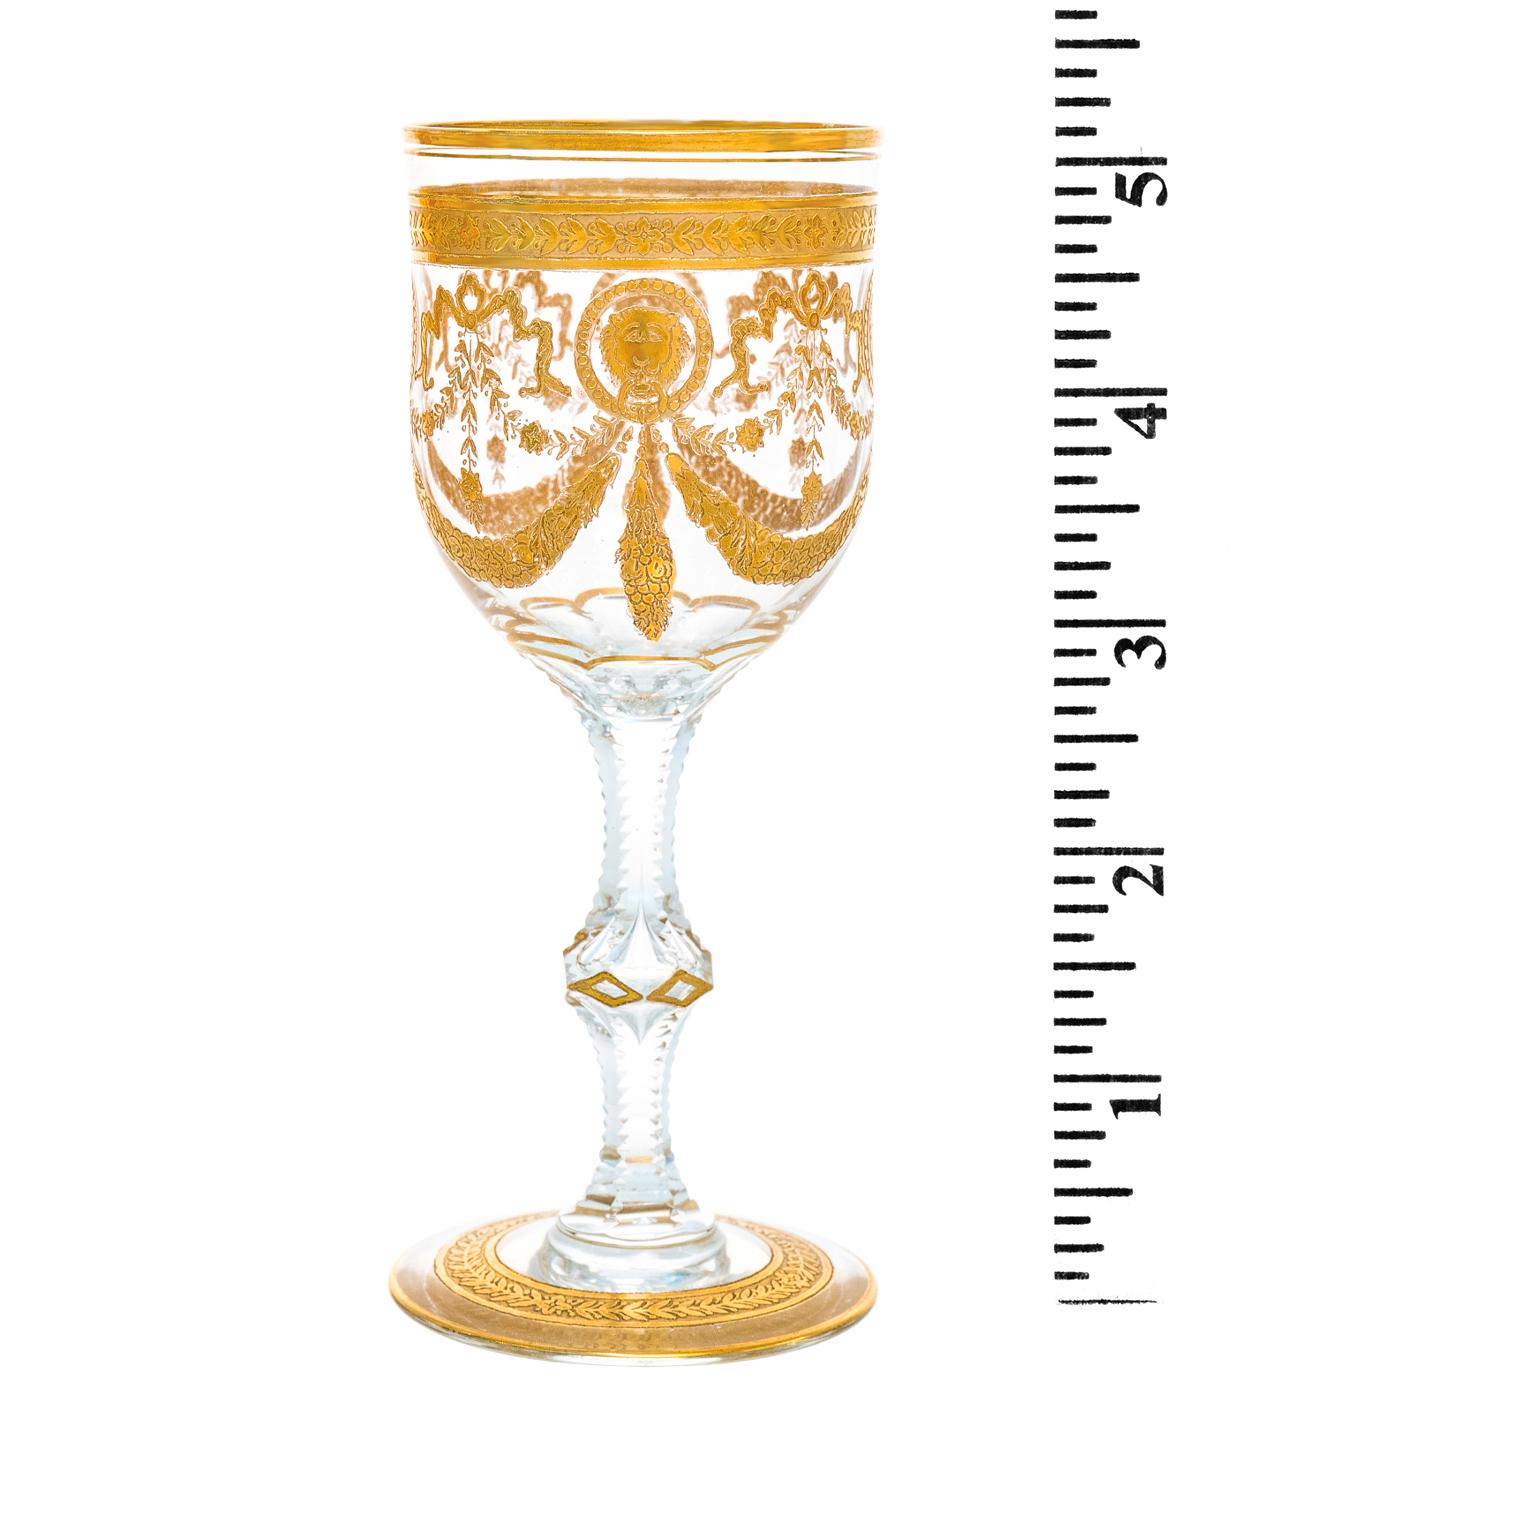 Early 20th Century St. Louis Congress Cordial Goblets For Sale